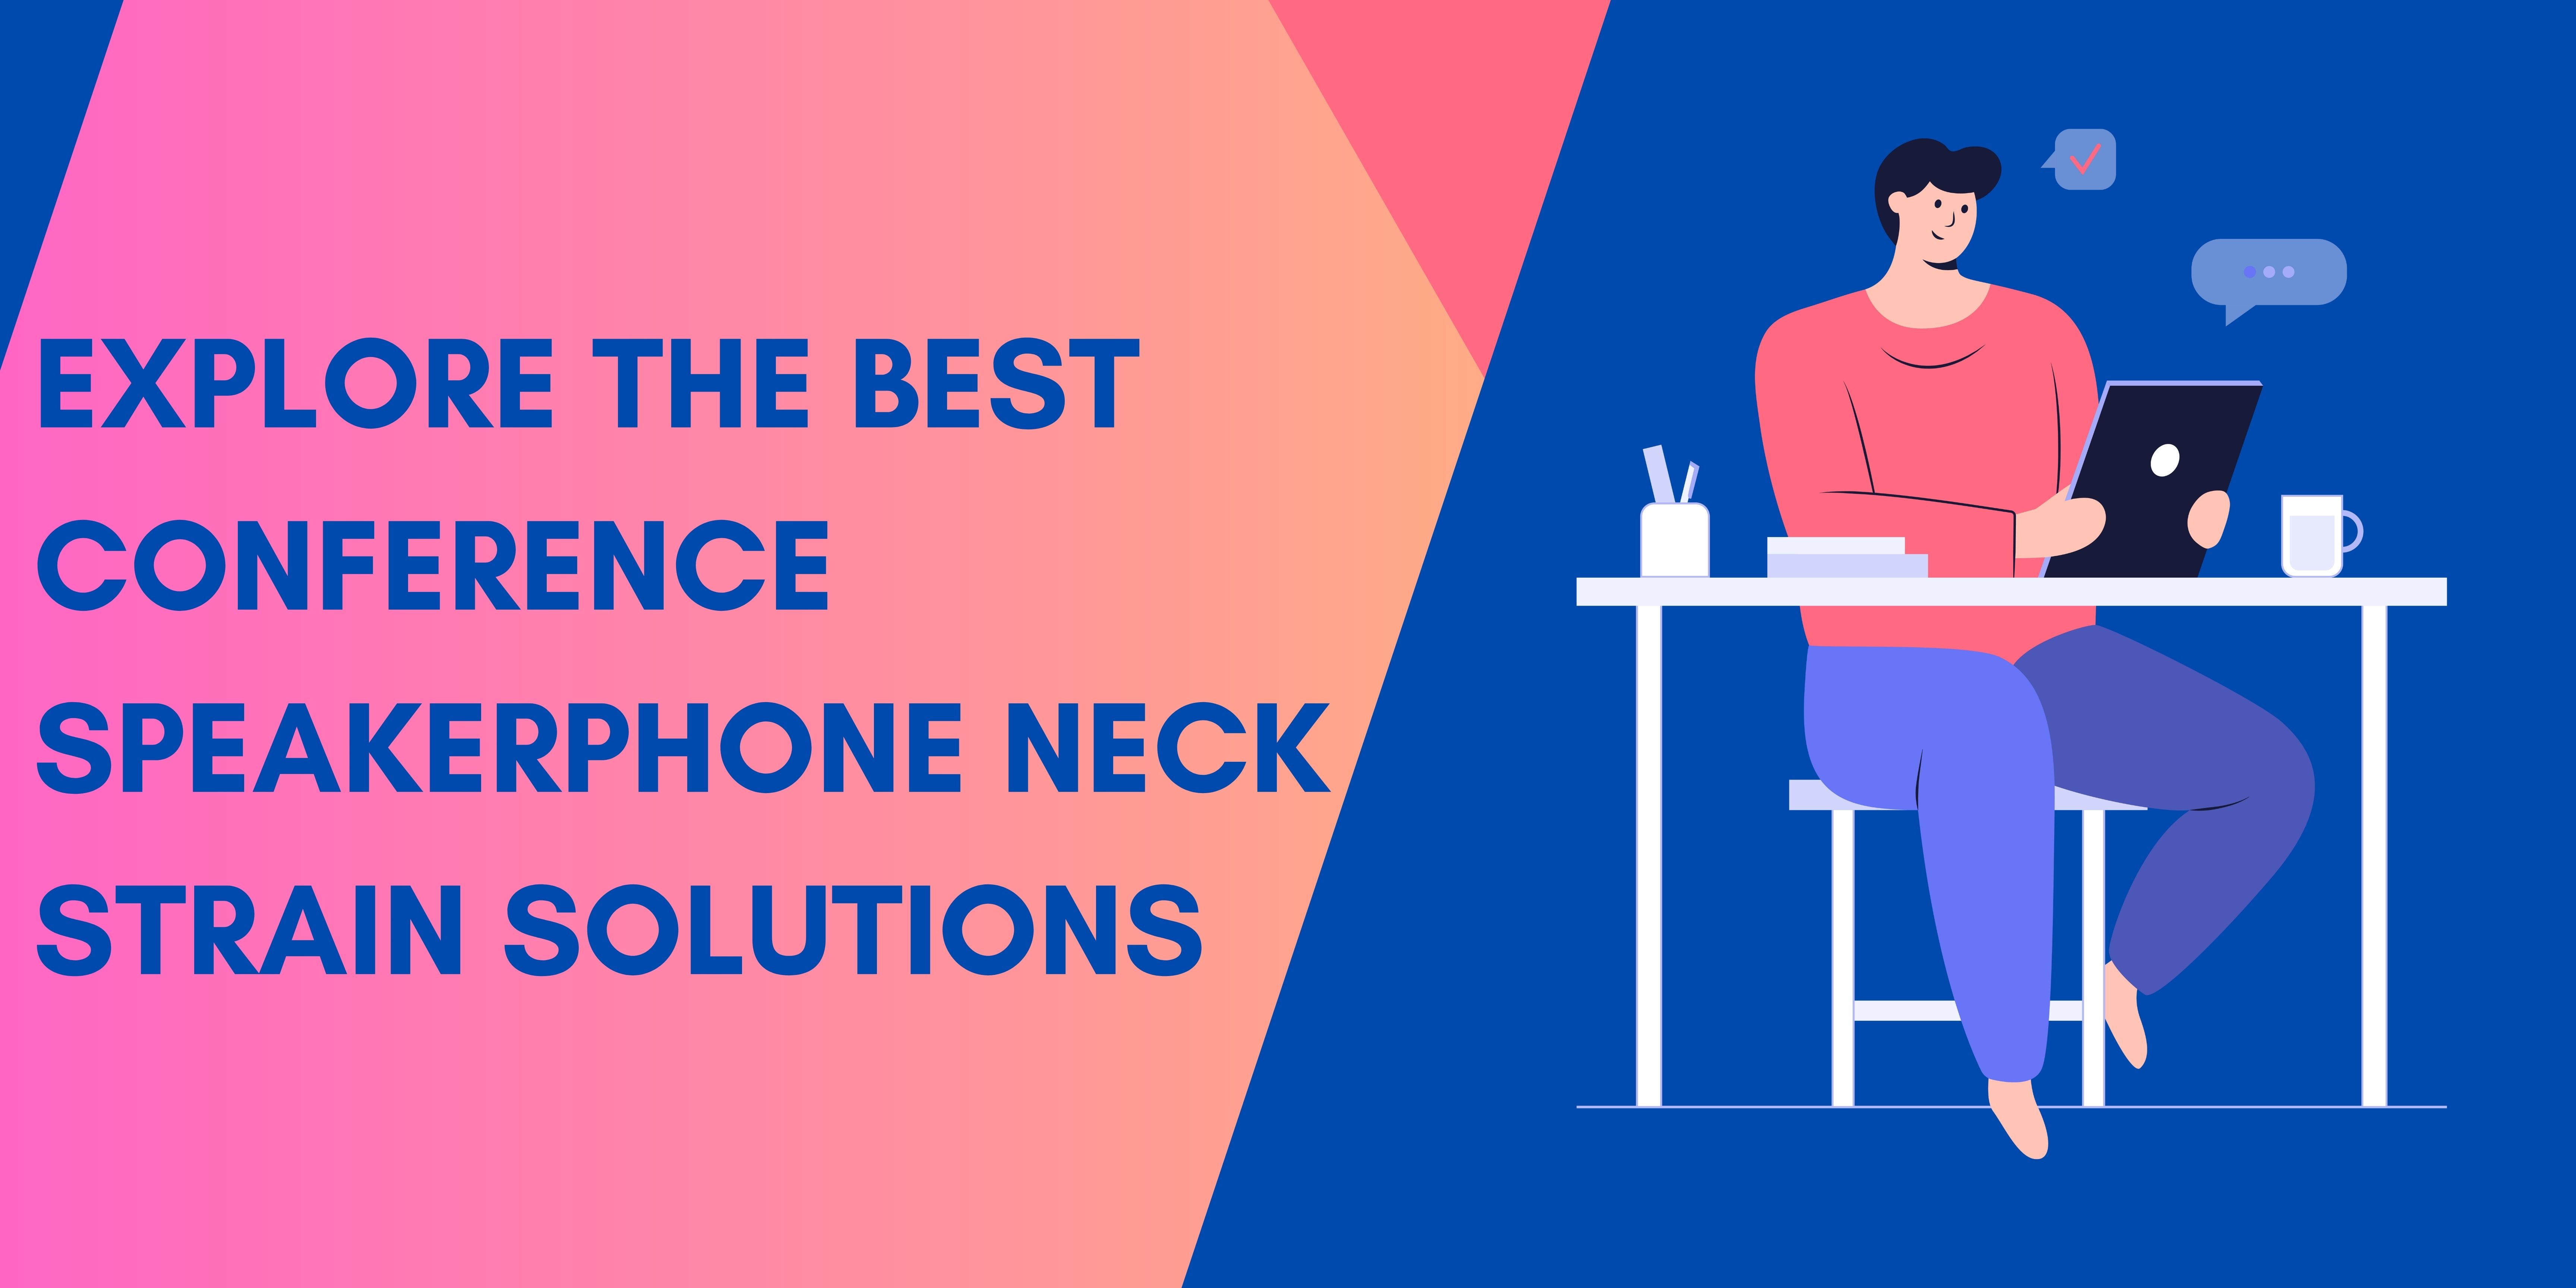 Explore the Best Conference Speakerphone Neck Strain Solutions